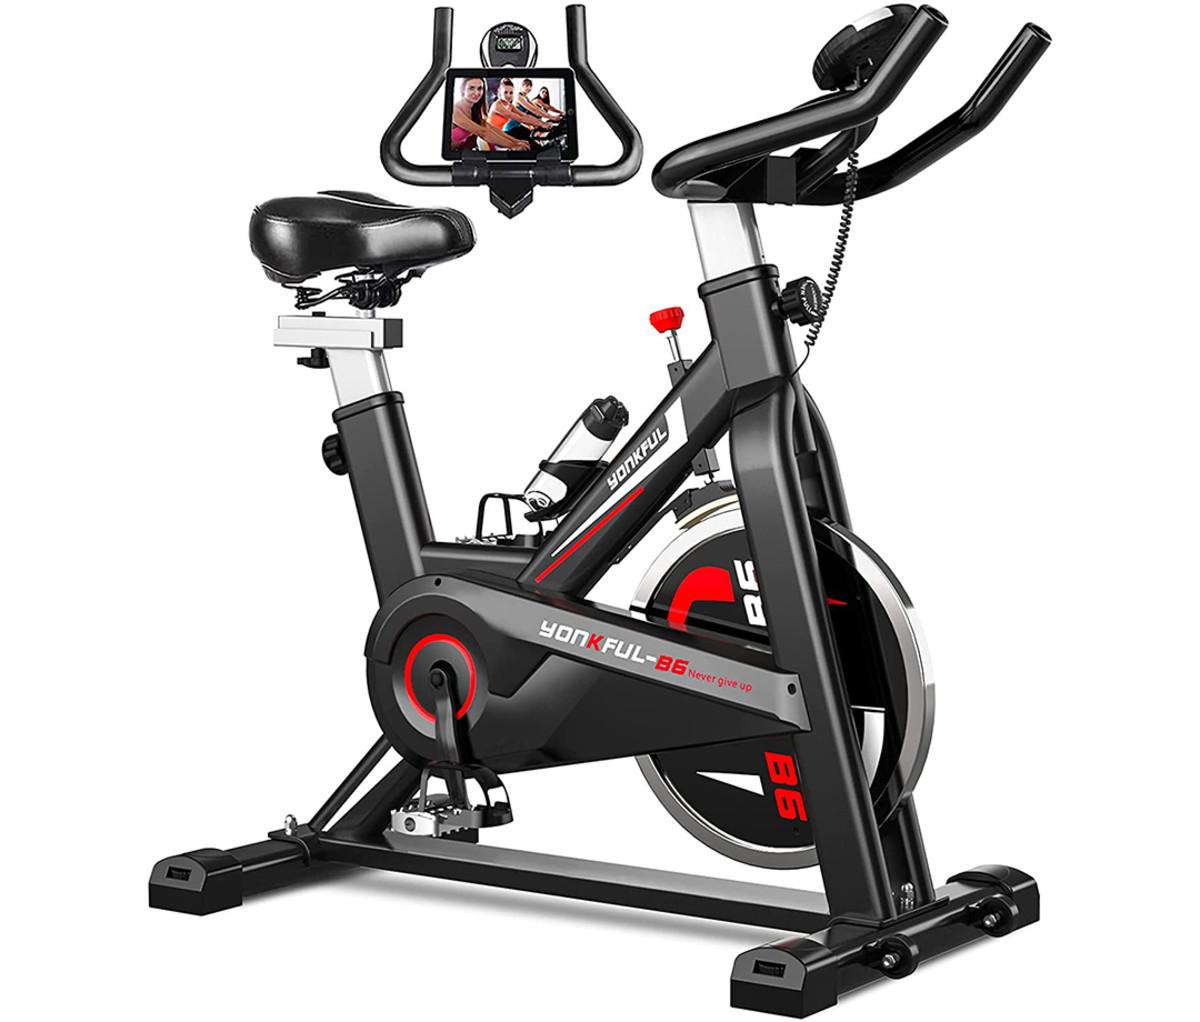 The Best Home Gym Equipment Deals Available During Cyber Week - Men's ...